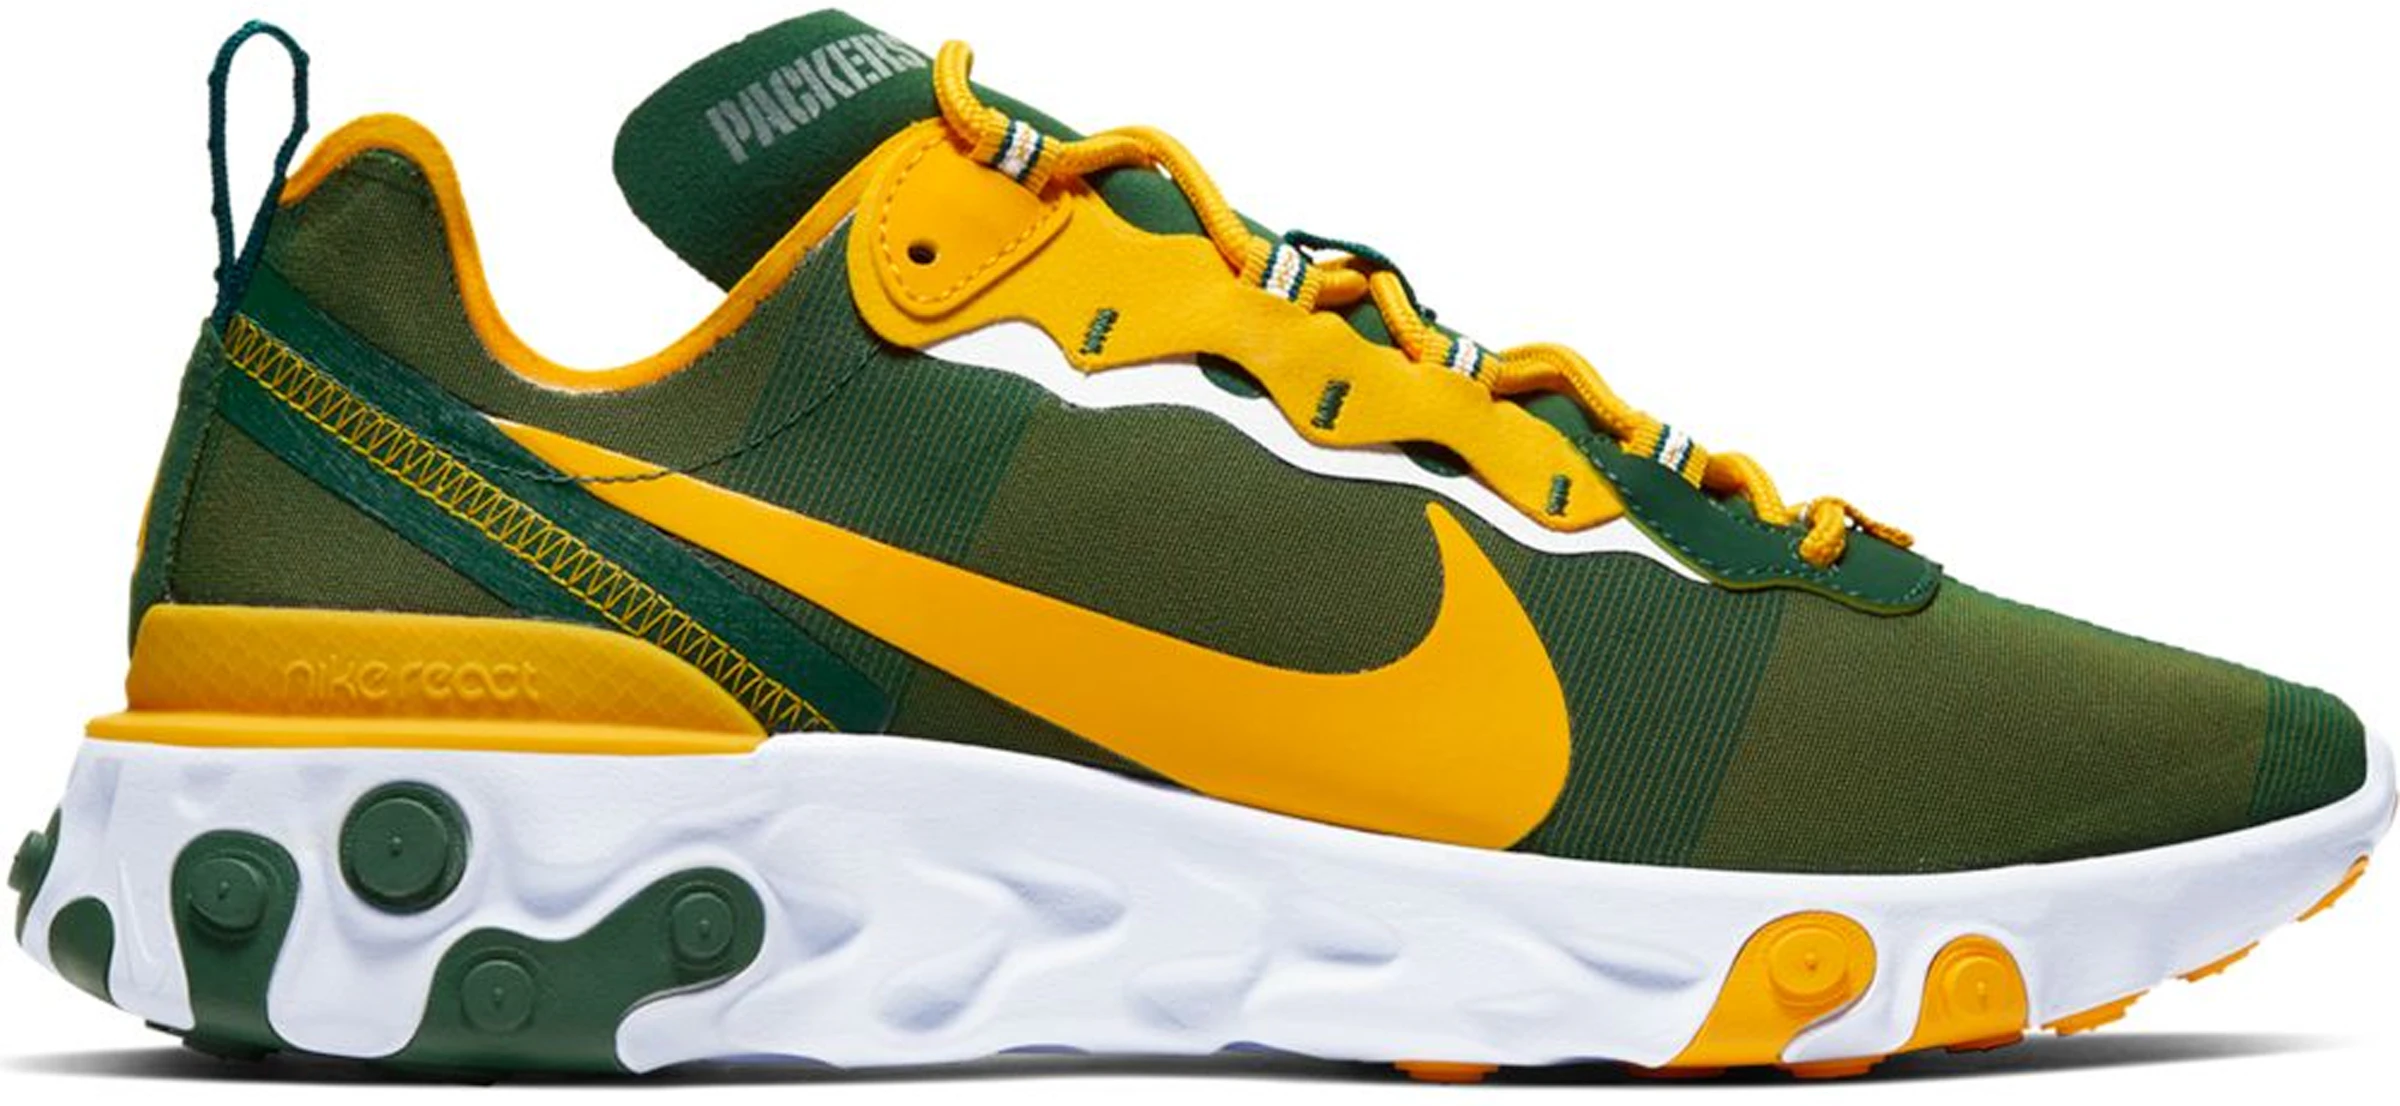 Nike React Element 55 Green Bay Packers - CK4882-300 - US